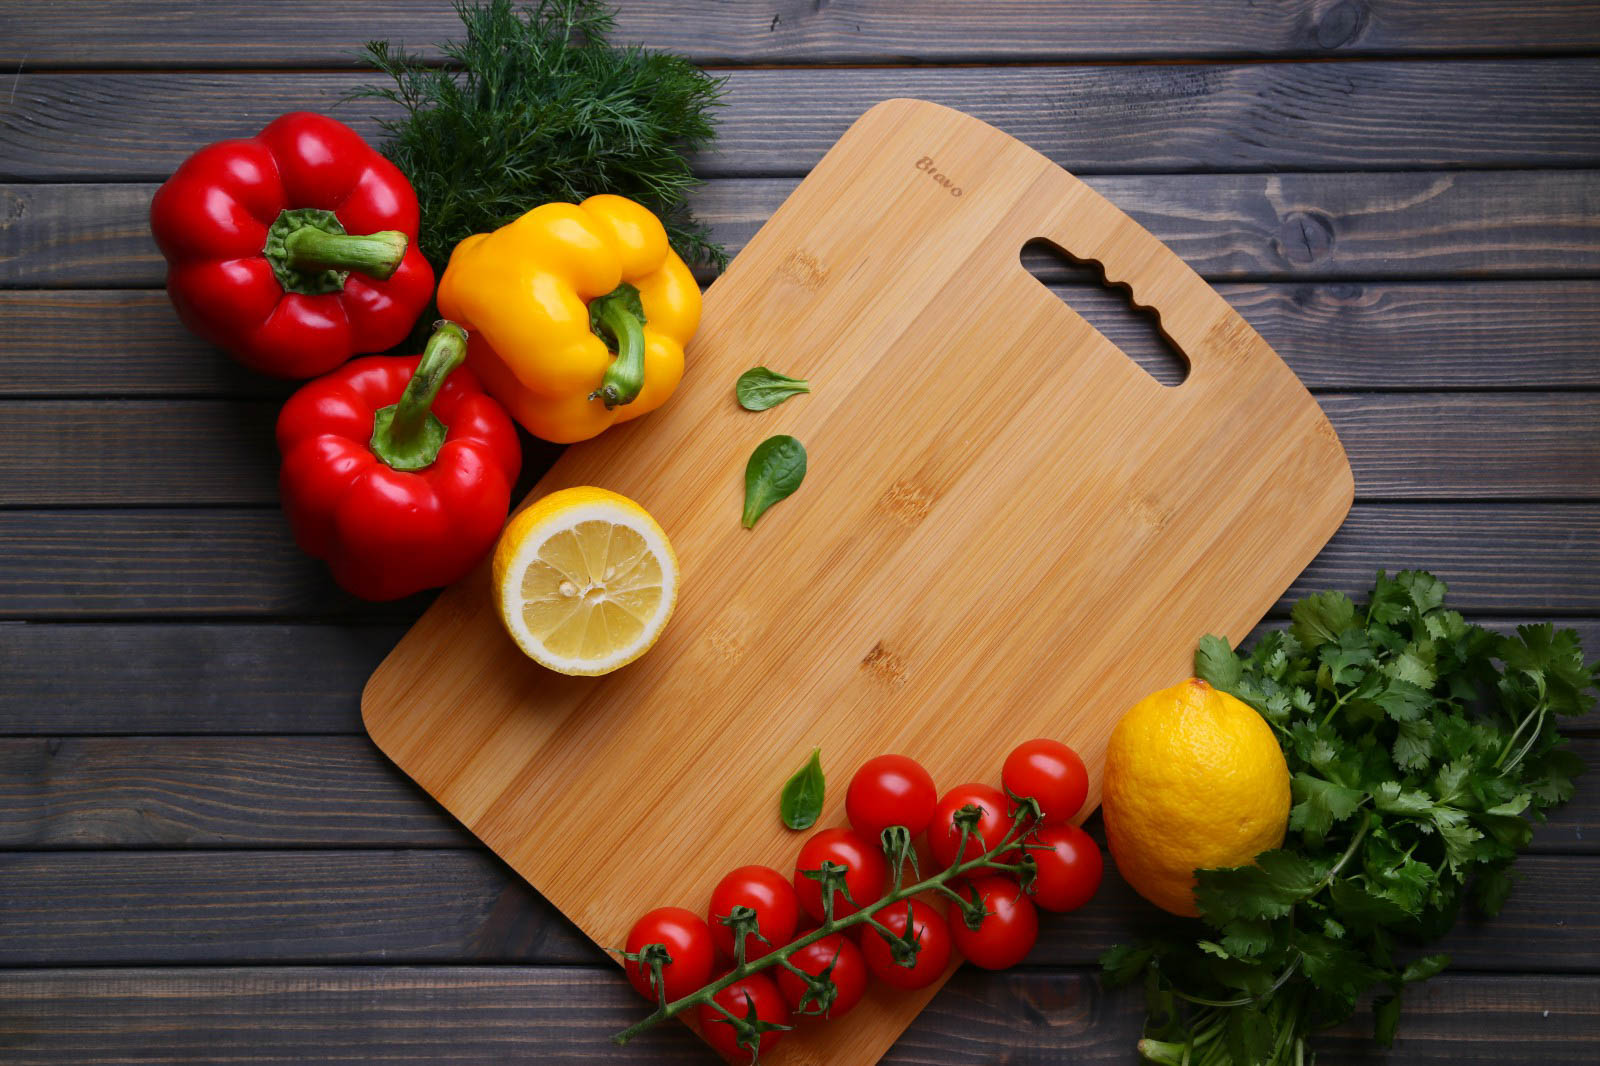 Ranking the best cutting boards for the kitchen in 2022